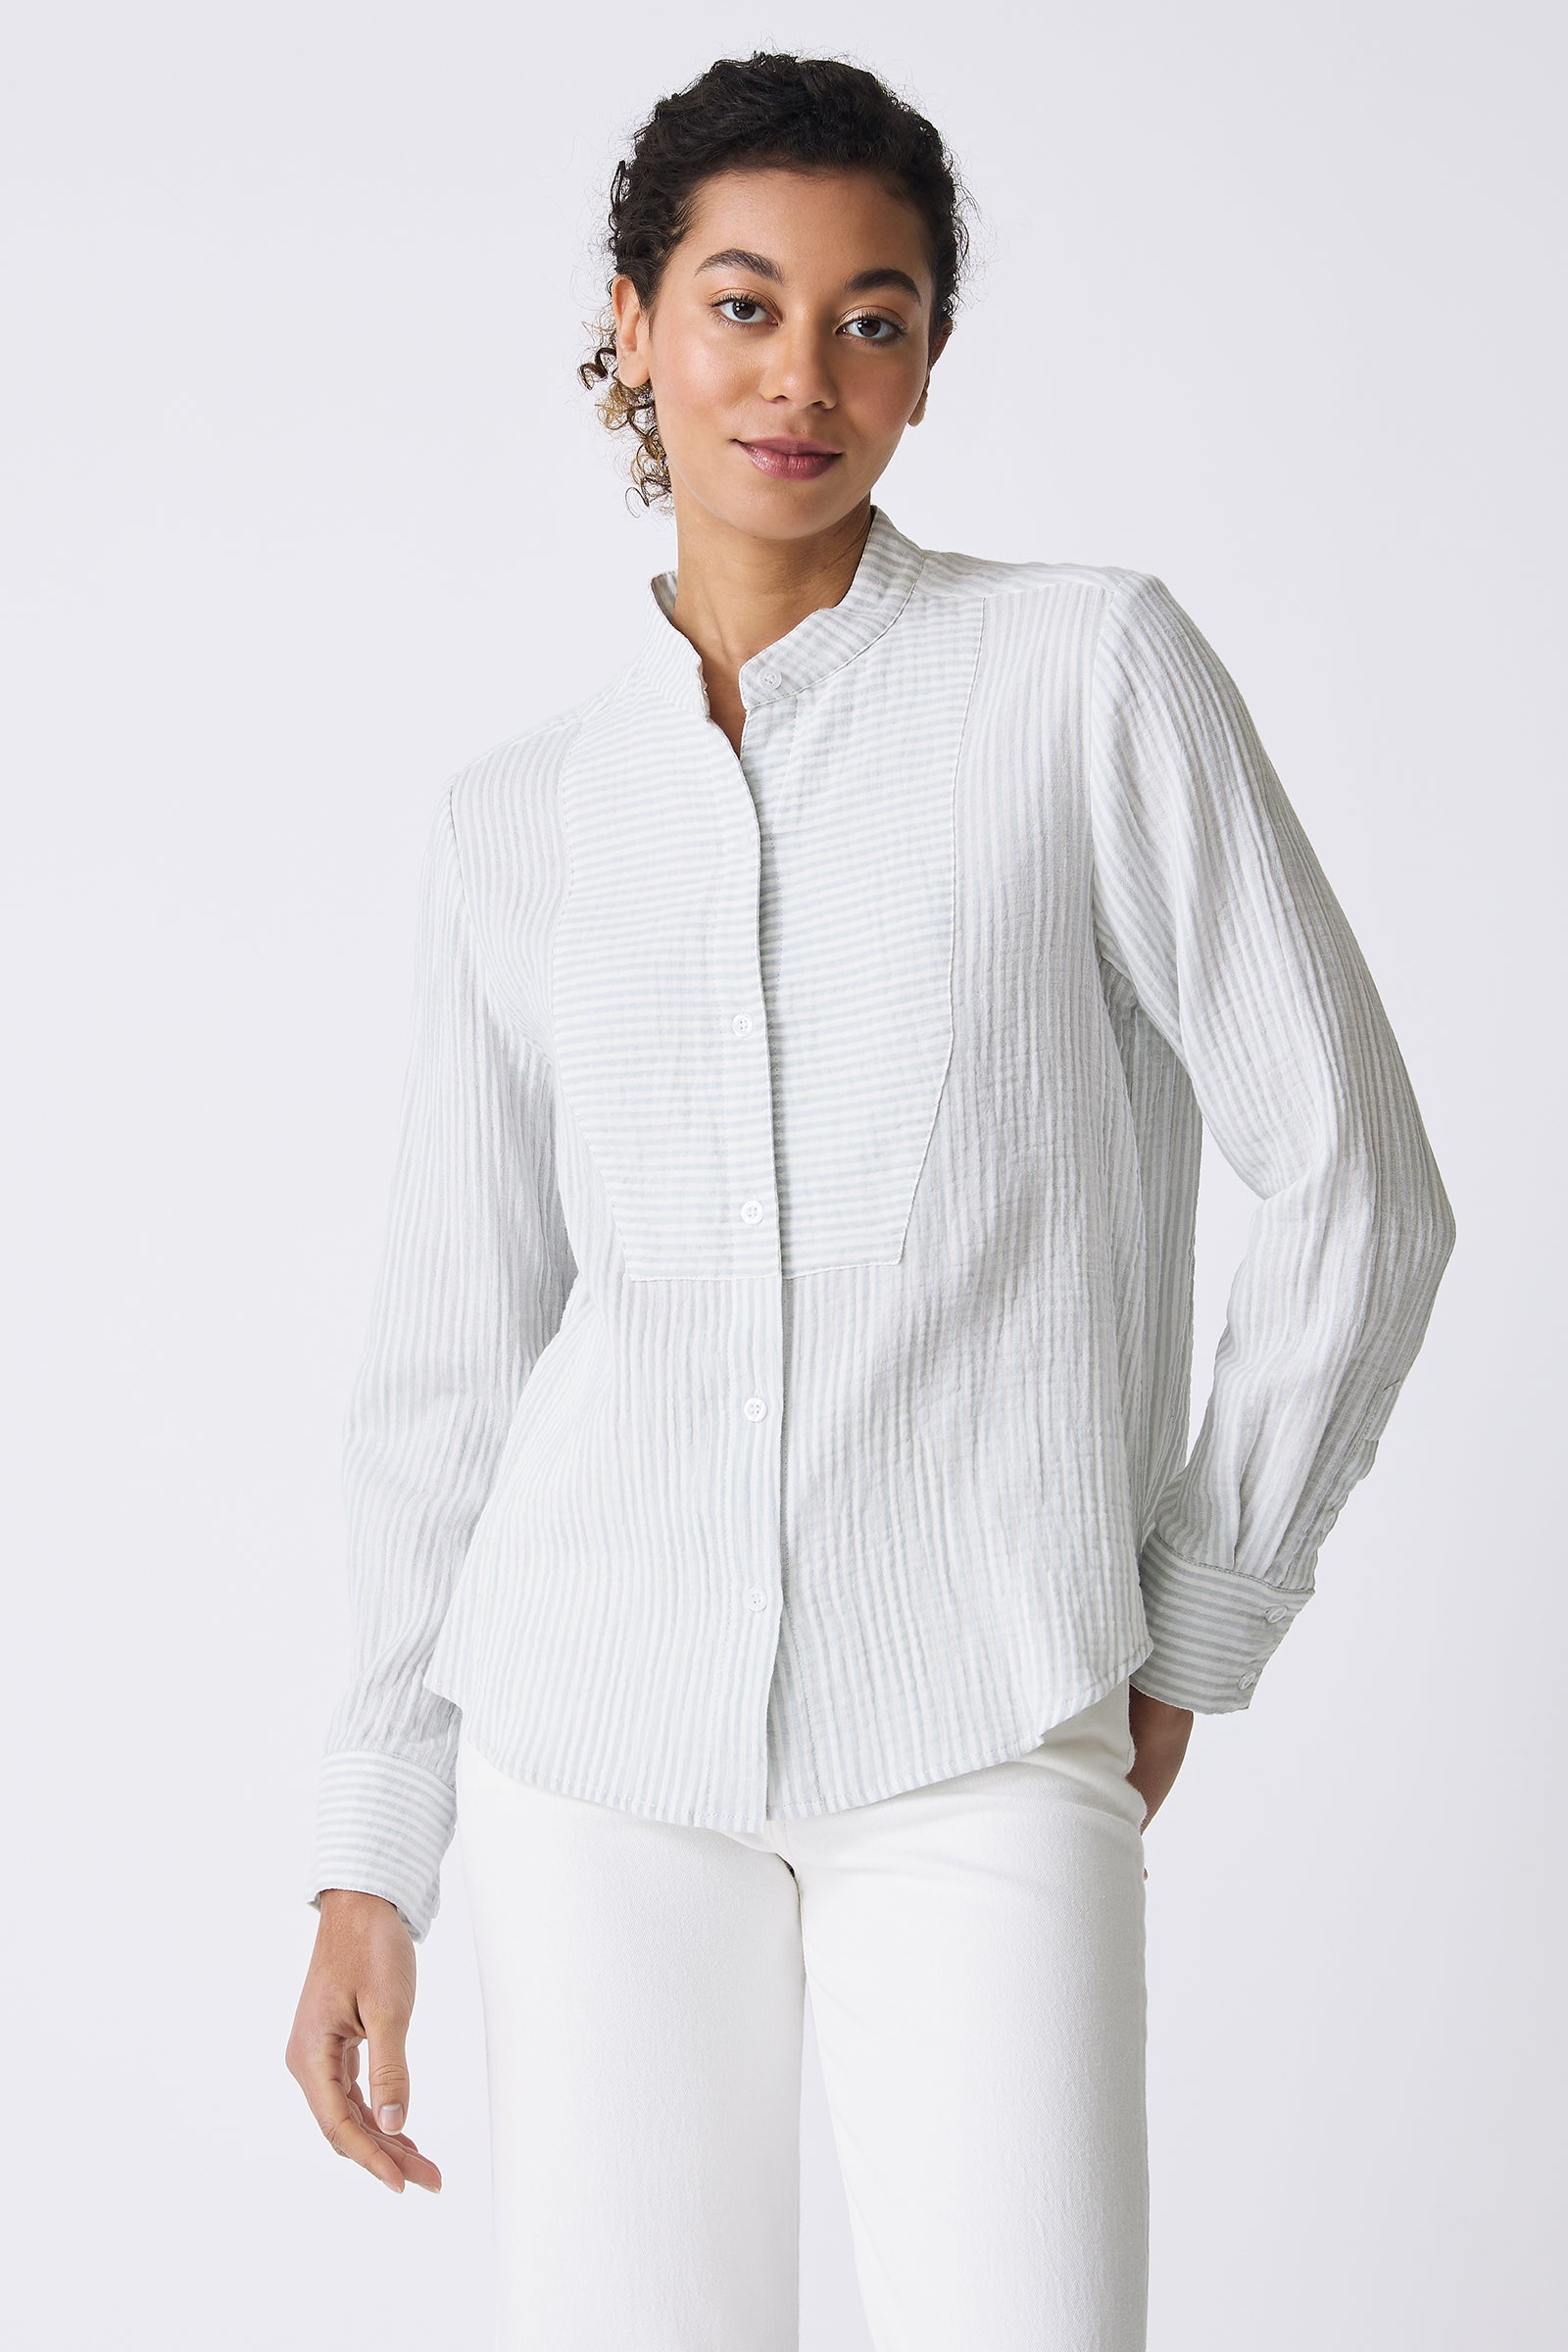 Kal Rieman Vera Tux Shirt in Blue Stripe on model with hand behind back front view